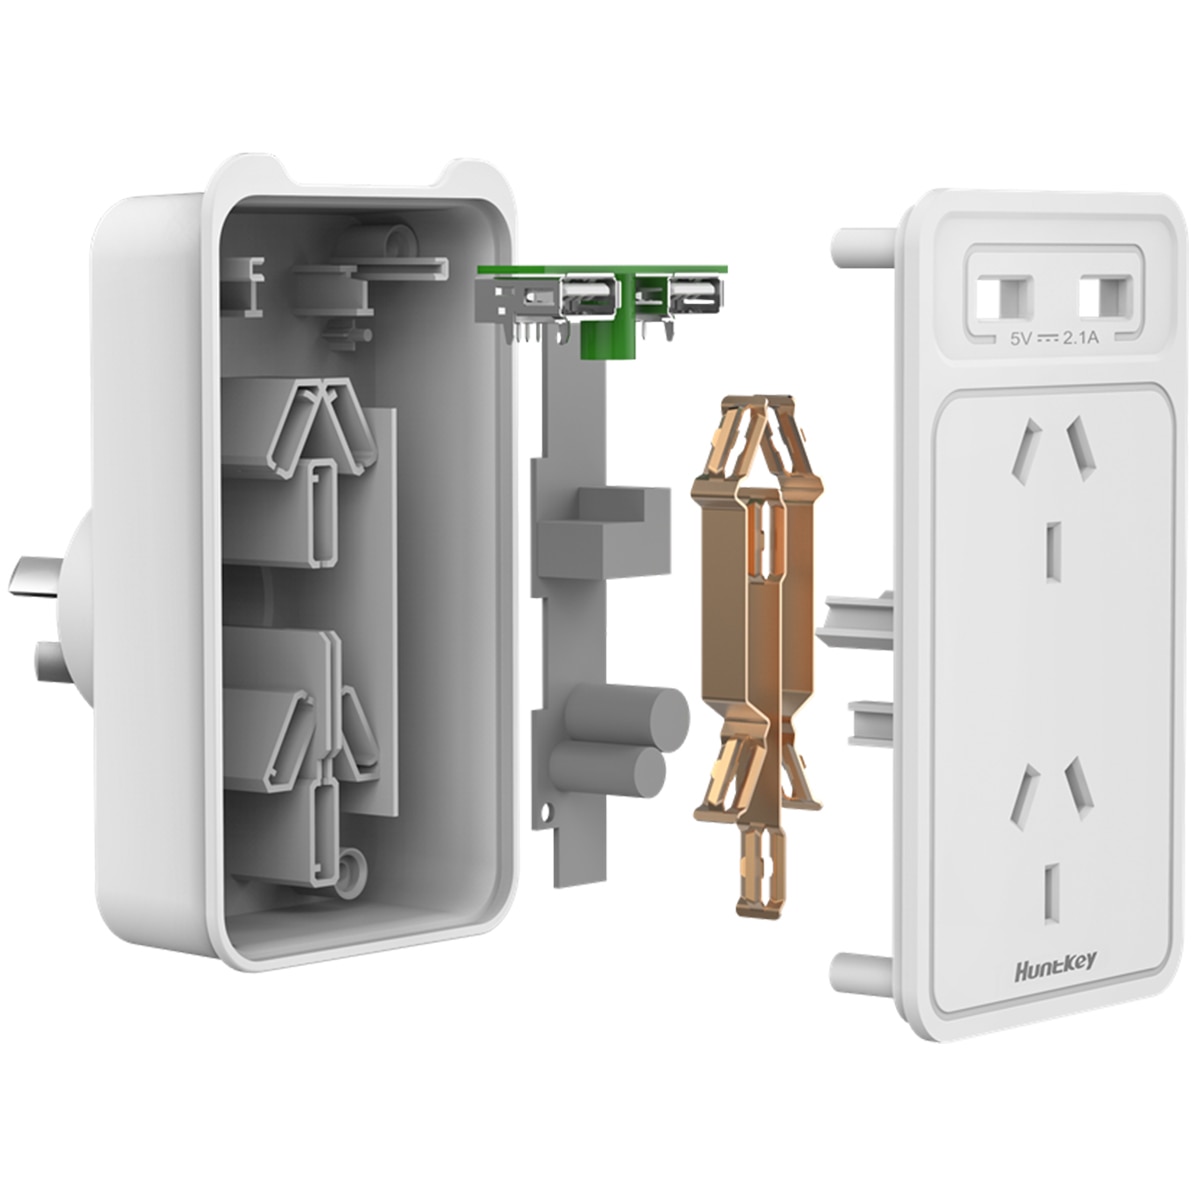 Wall Socket Adaptor 2 outlet  - 2 pack